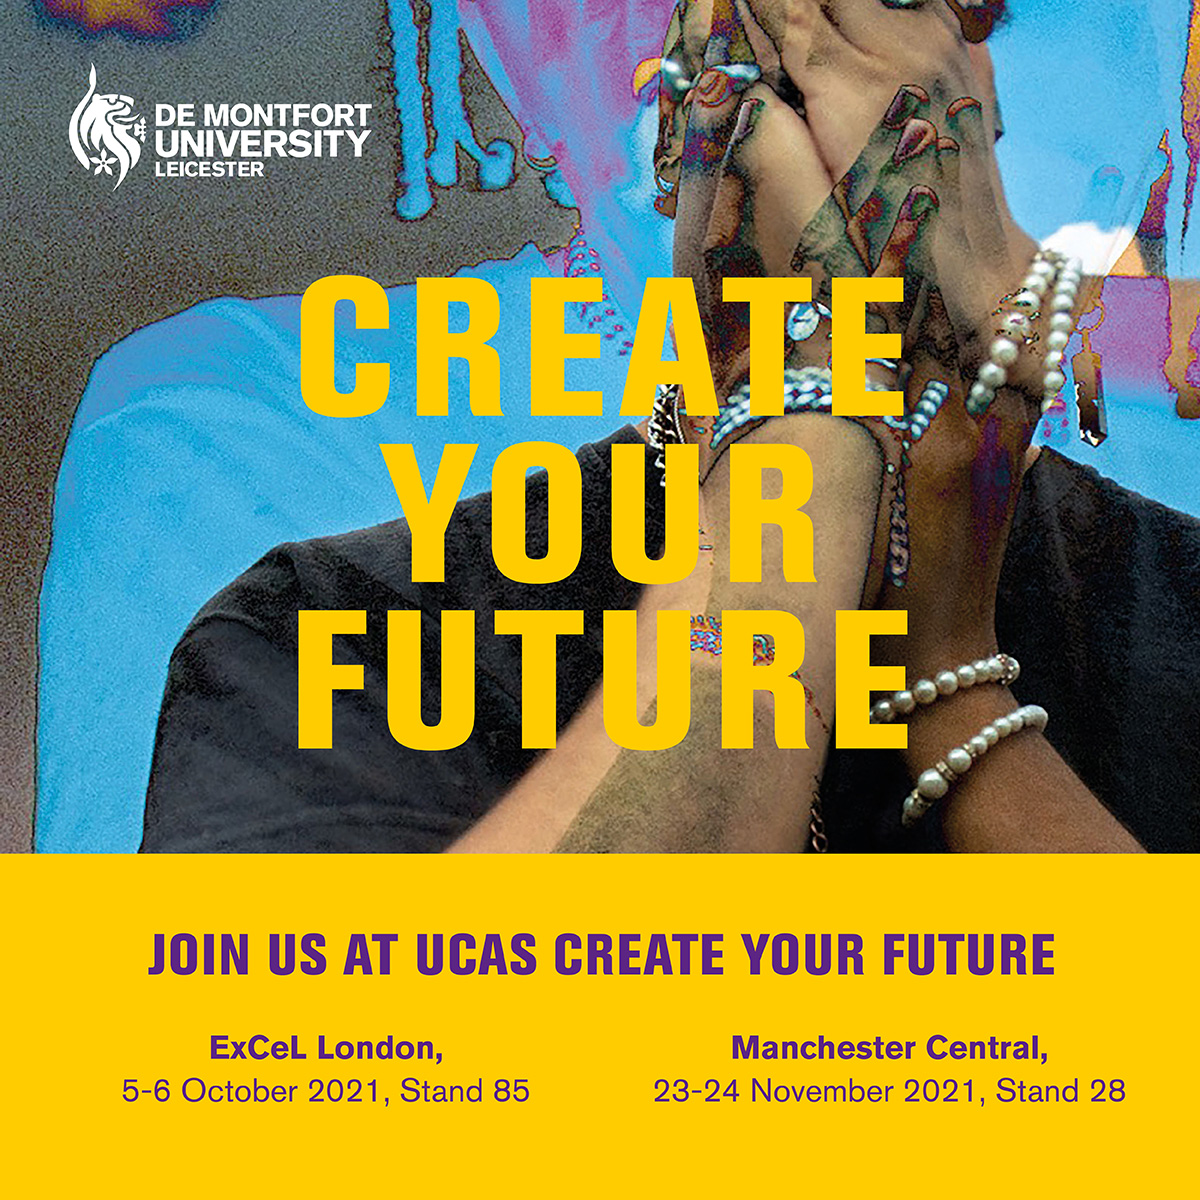 London, we're coming to find the next generation of actors, dancers and performers! 🎭 Join us as UCAS Create Your Future on 5-6 October. Book your place ➡ bit.ly/3zmJSNW #CreateYourFuture